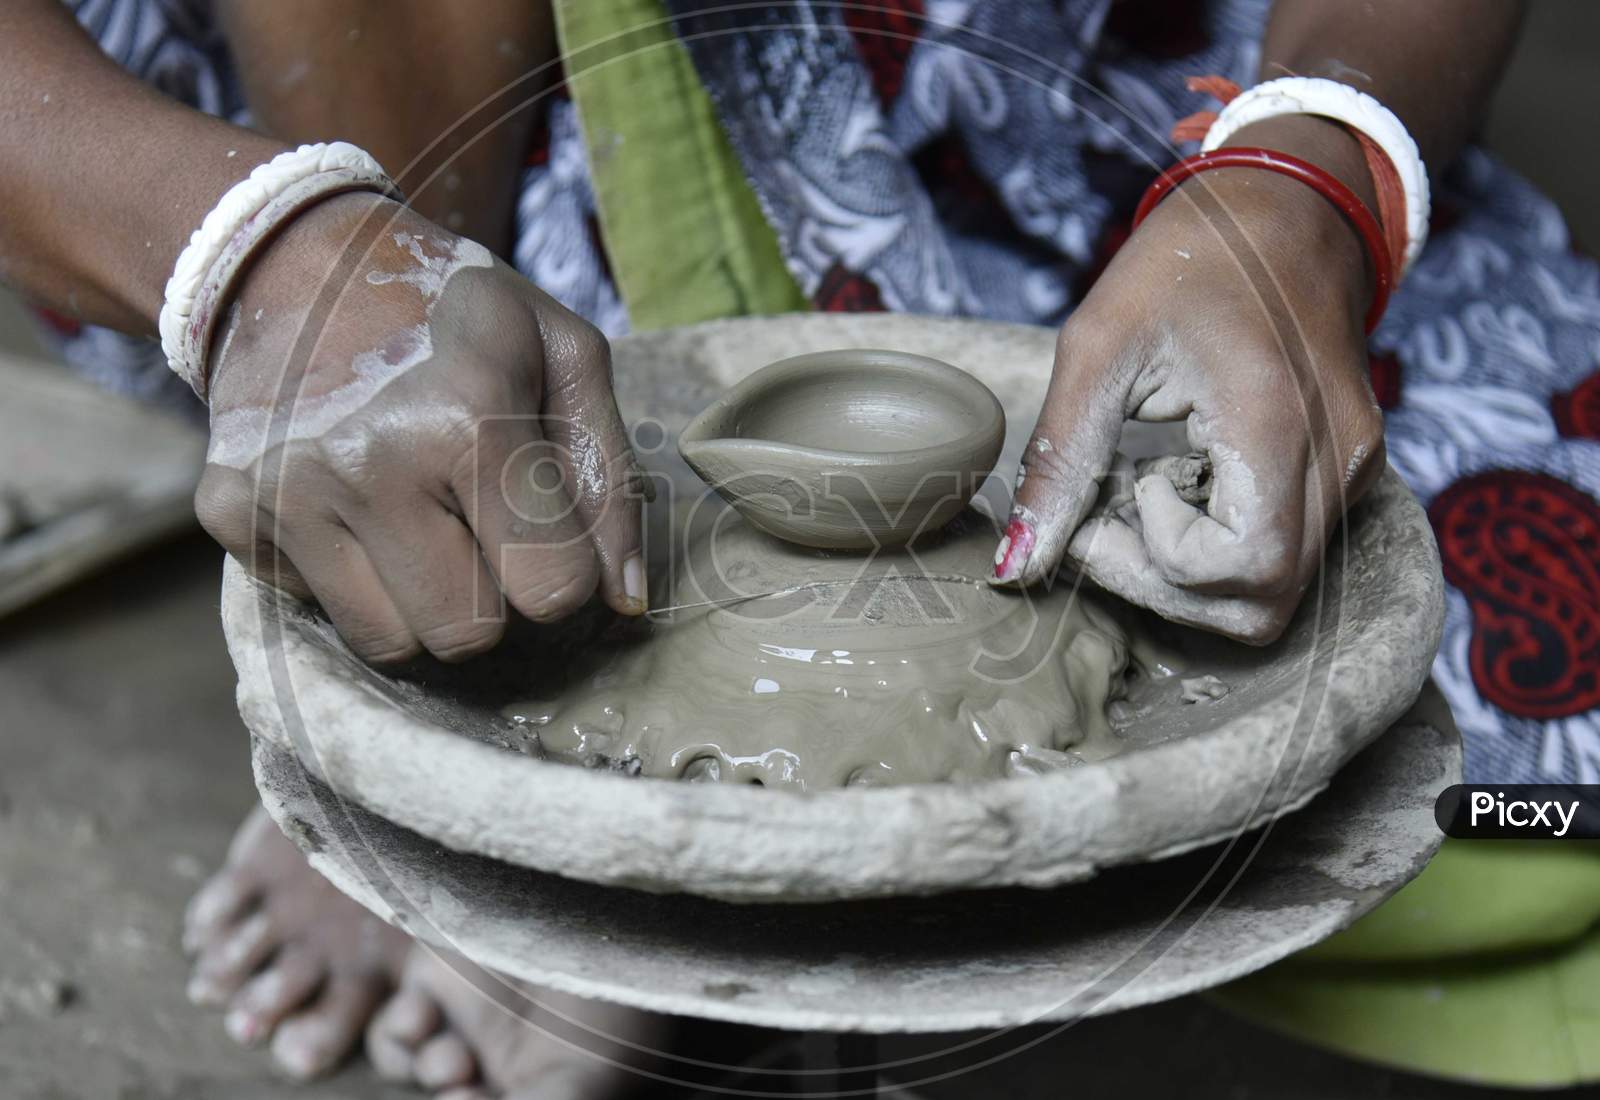 Woman Potter Prepares A Clay Lamps In Her Residence Ahead Of Diwali Festival, In The Outskirt Of Guwahati, In Assam